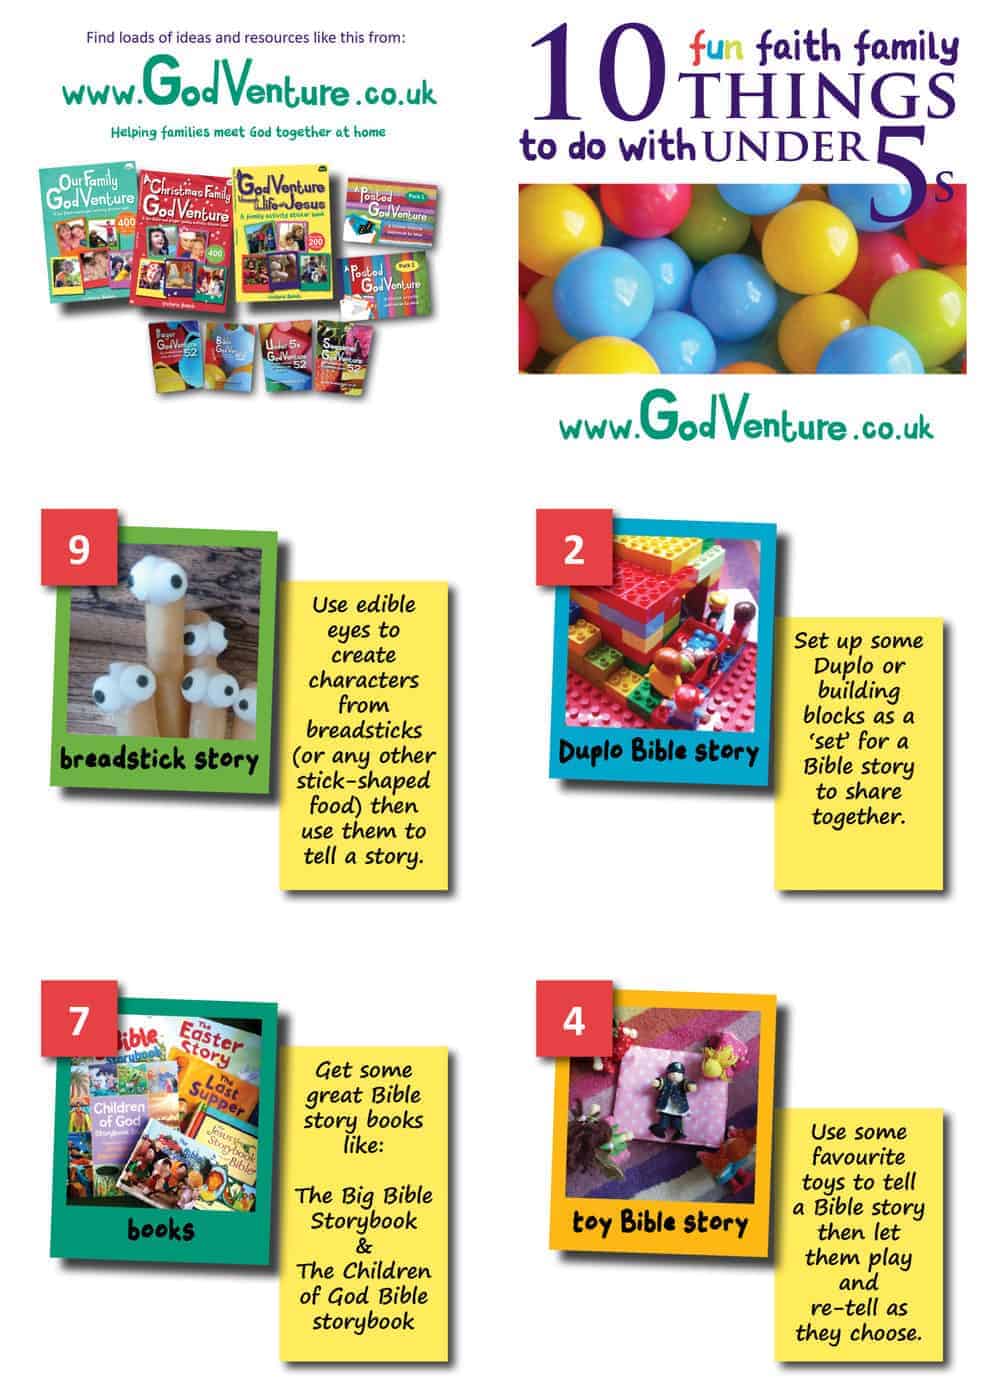 10 fun family faith filled activities for under 5s leaflet April 15